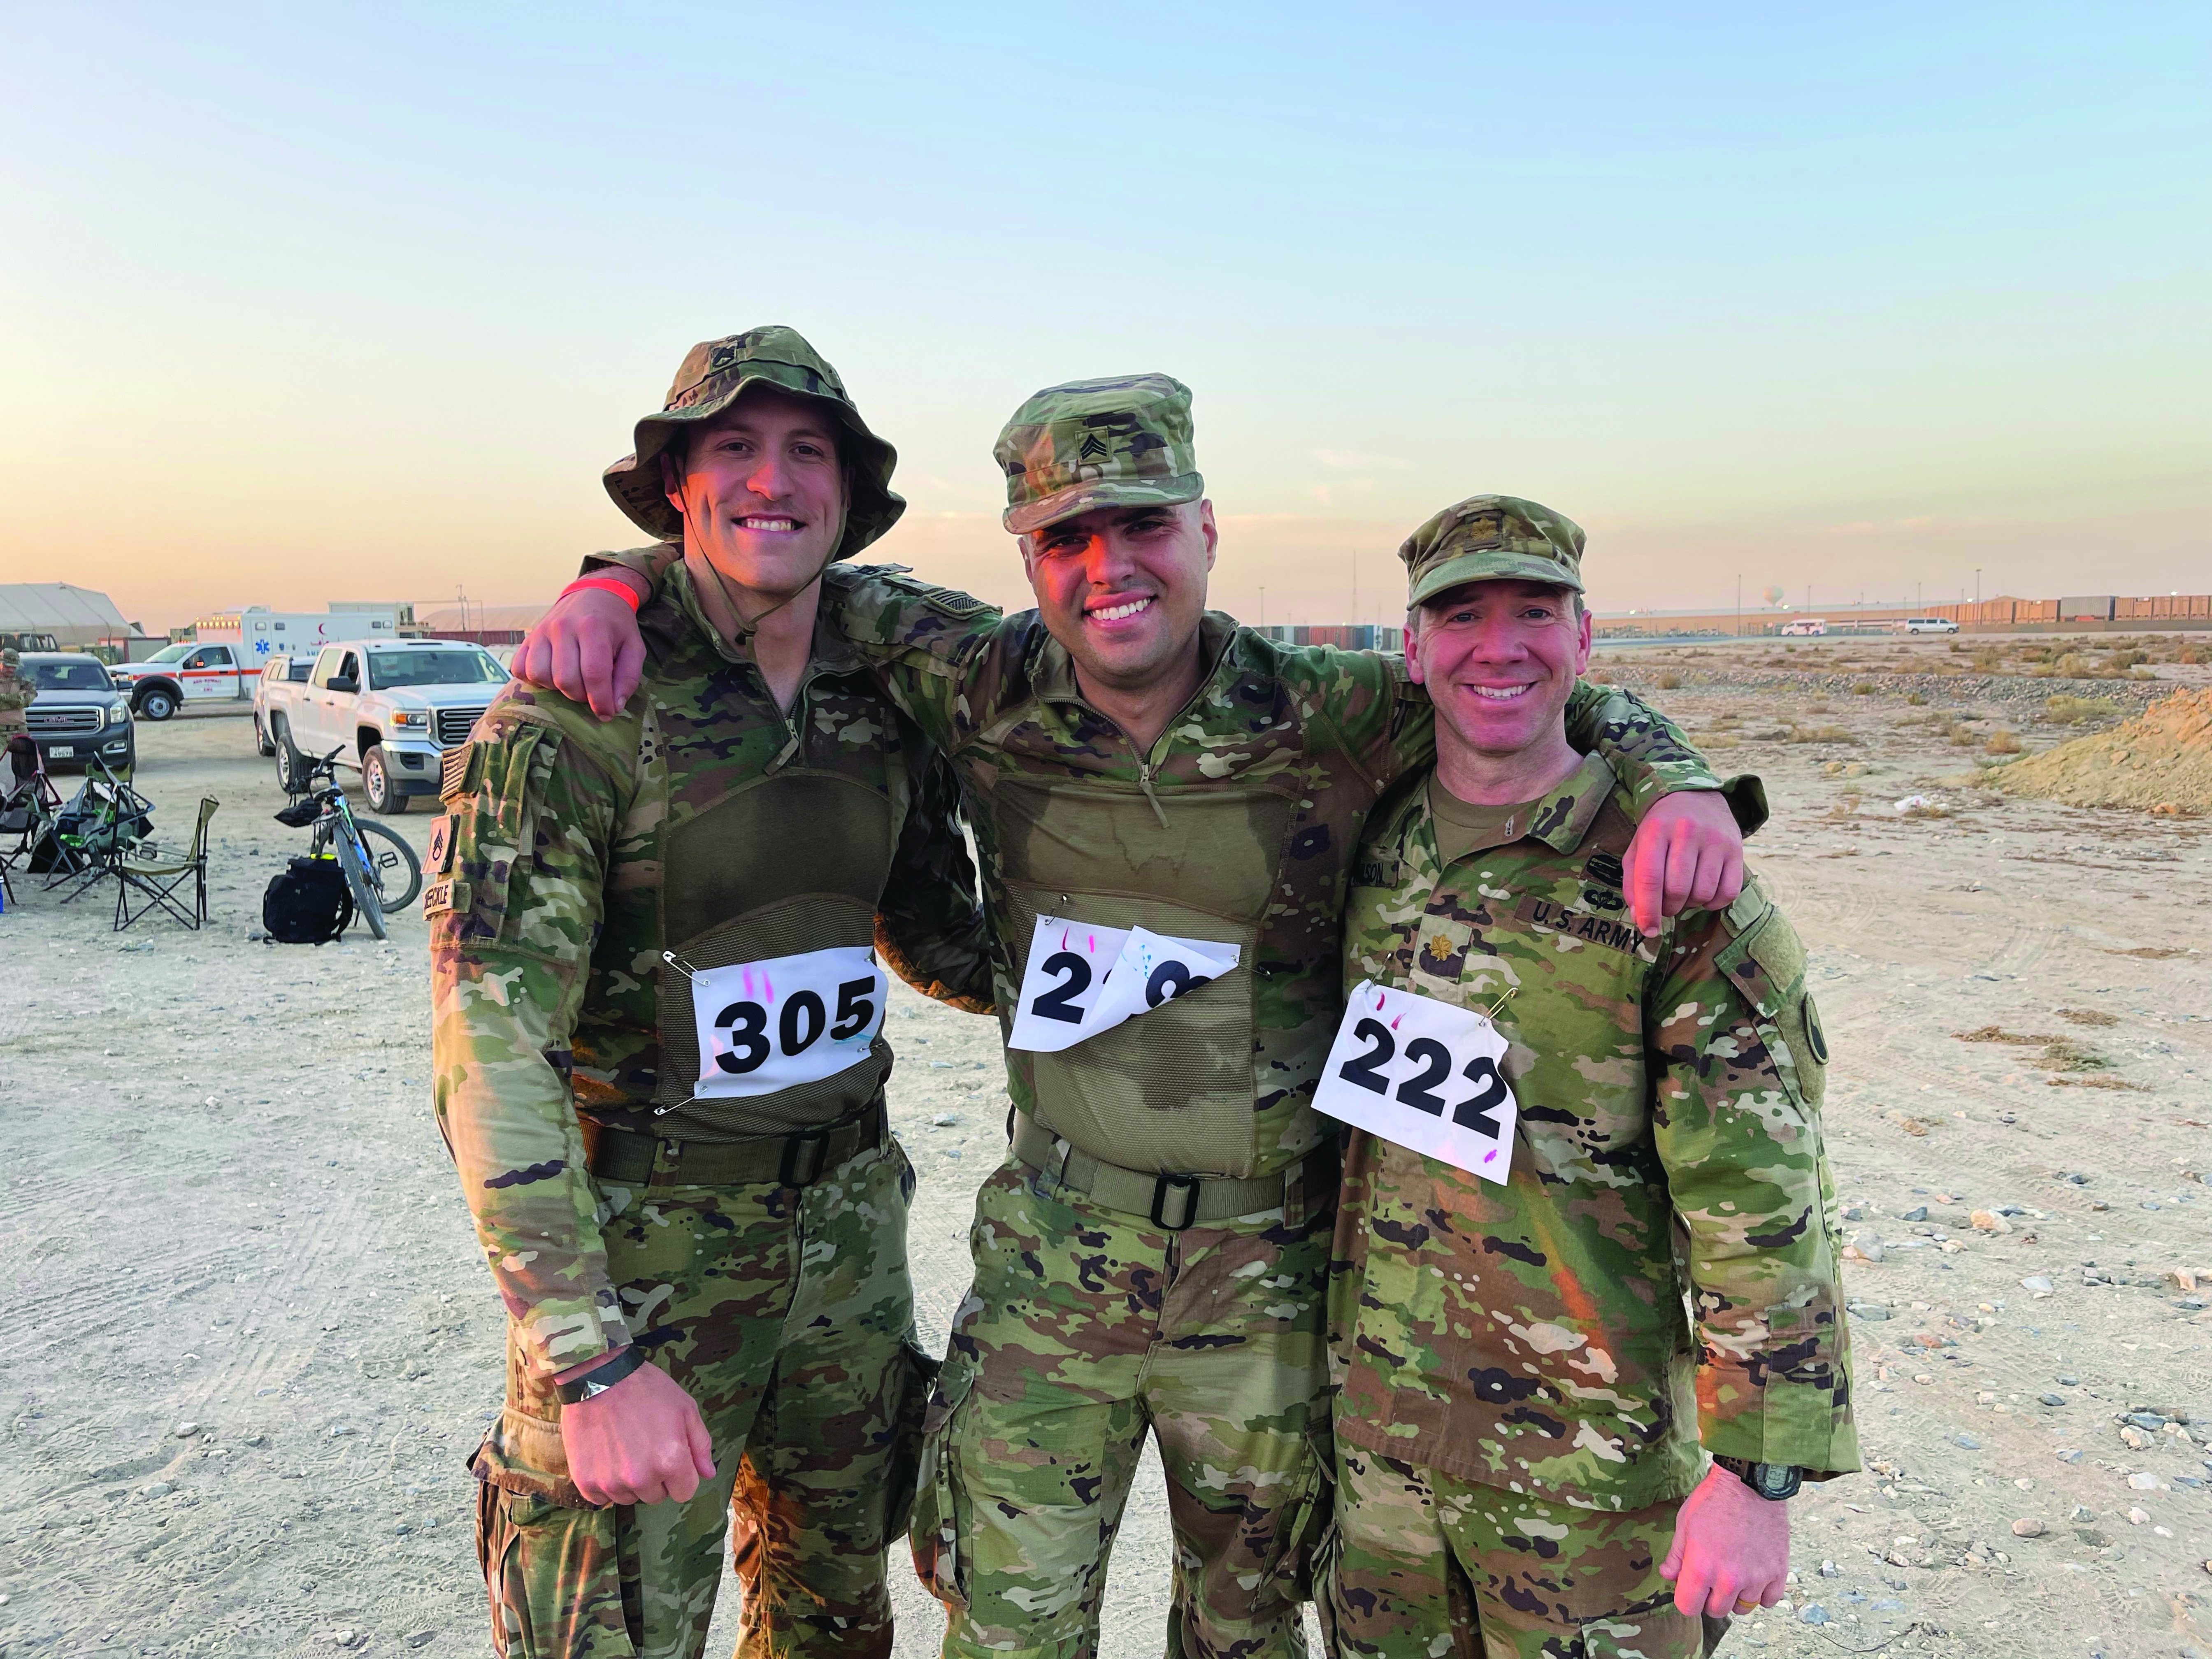 On 13 November 2021, members of the Camp Arifjan JAG office completed the Norwegian Foot March, an 18-mile foot march with 25-pound ruck. Pictured L to R: SSG Zane Schmeeckle, SGT Michael O’Neil, and MAJ John Parson. Not pictured: CPT Thomas Wisniewski.